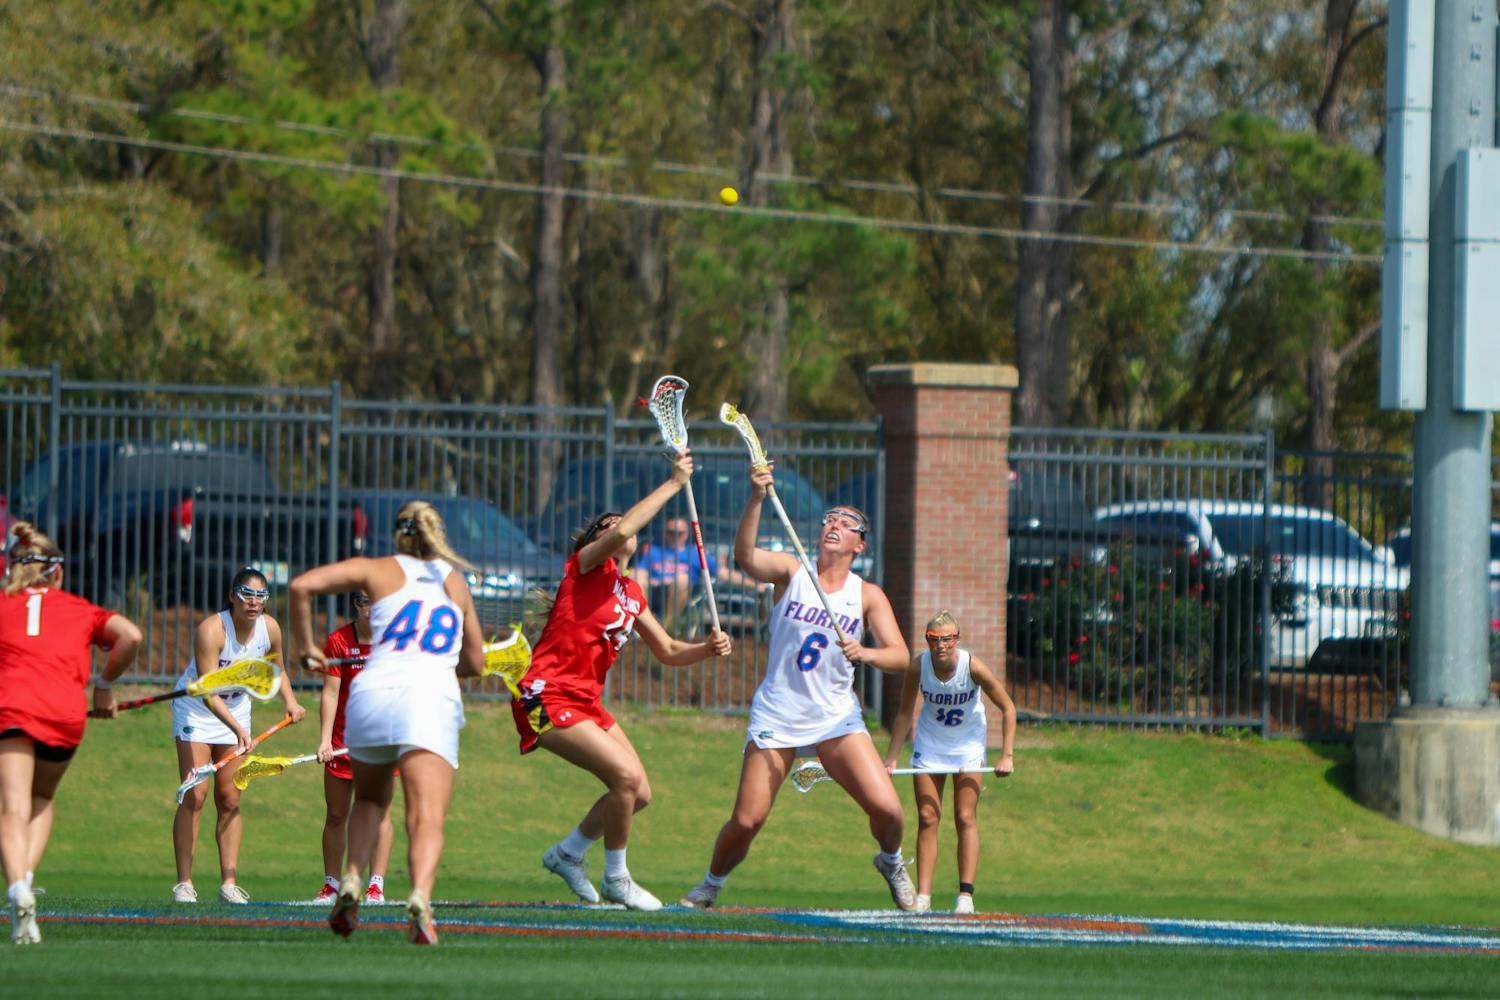 Florida attacker Liz Harrison fights for a draw control during the Gators' 14-13 loss to the Terrapins on Saturday, Feb. 25, 2023.